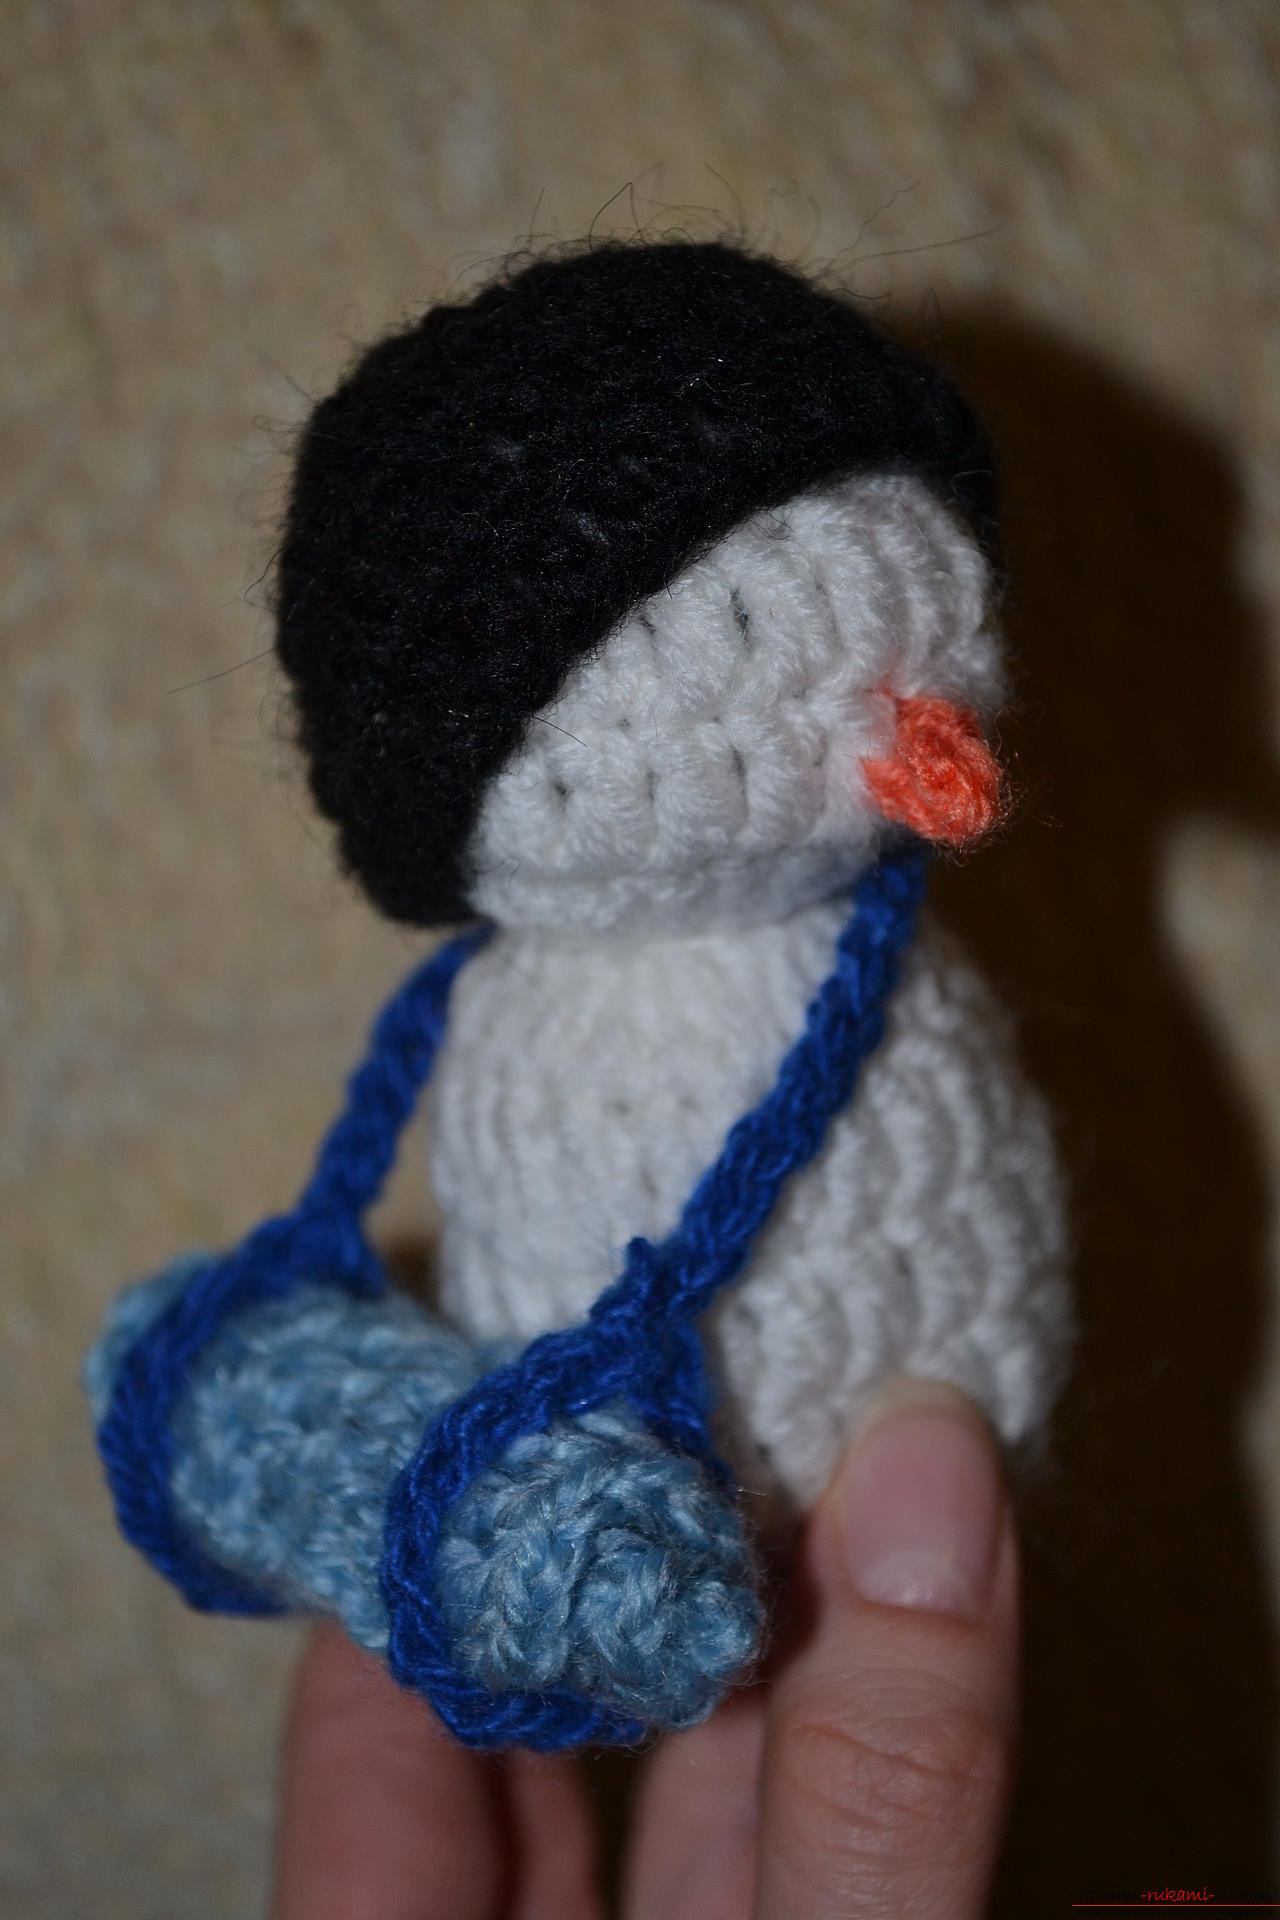 A master class with a photo and description will teach the crocheting of a snowman, which will be understandable for beginners. Photo №5